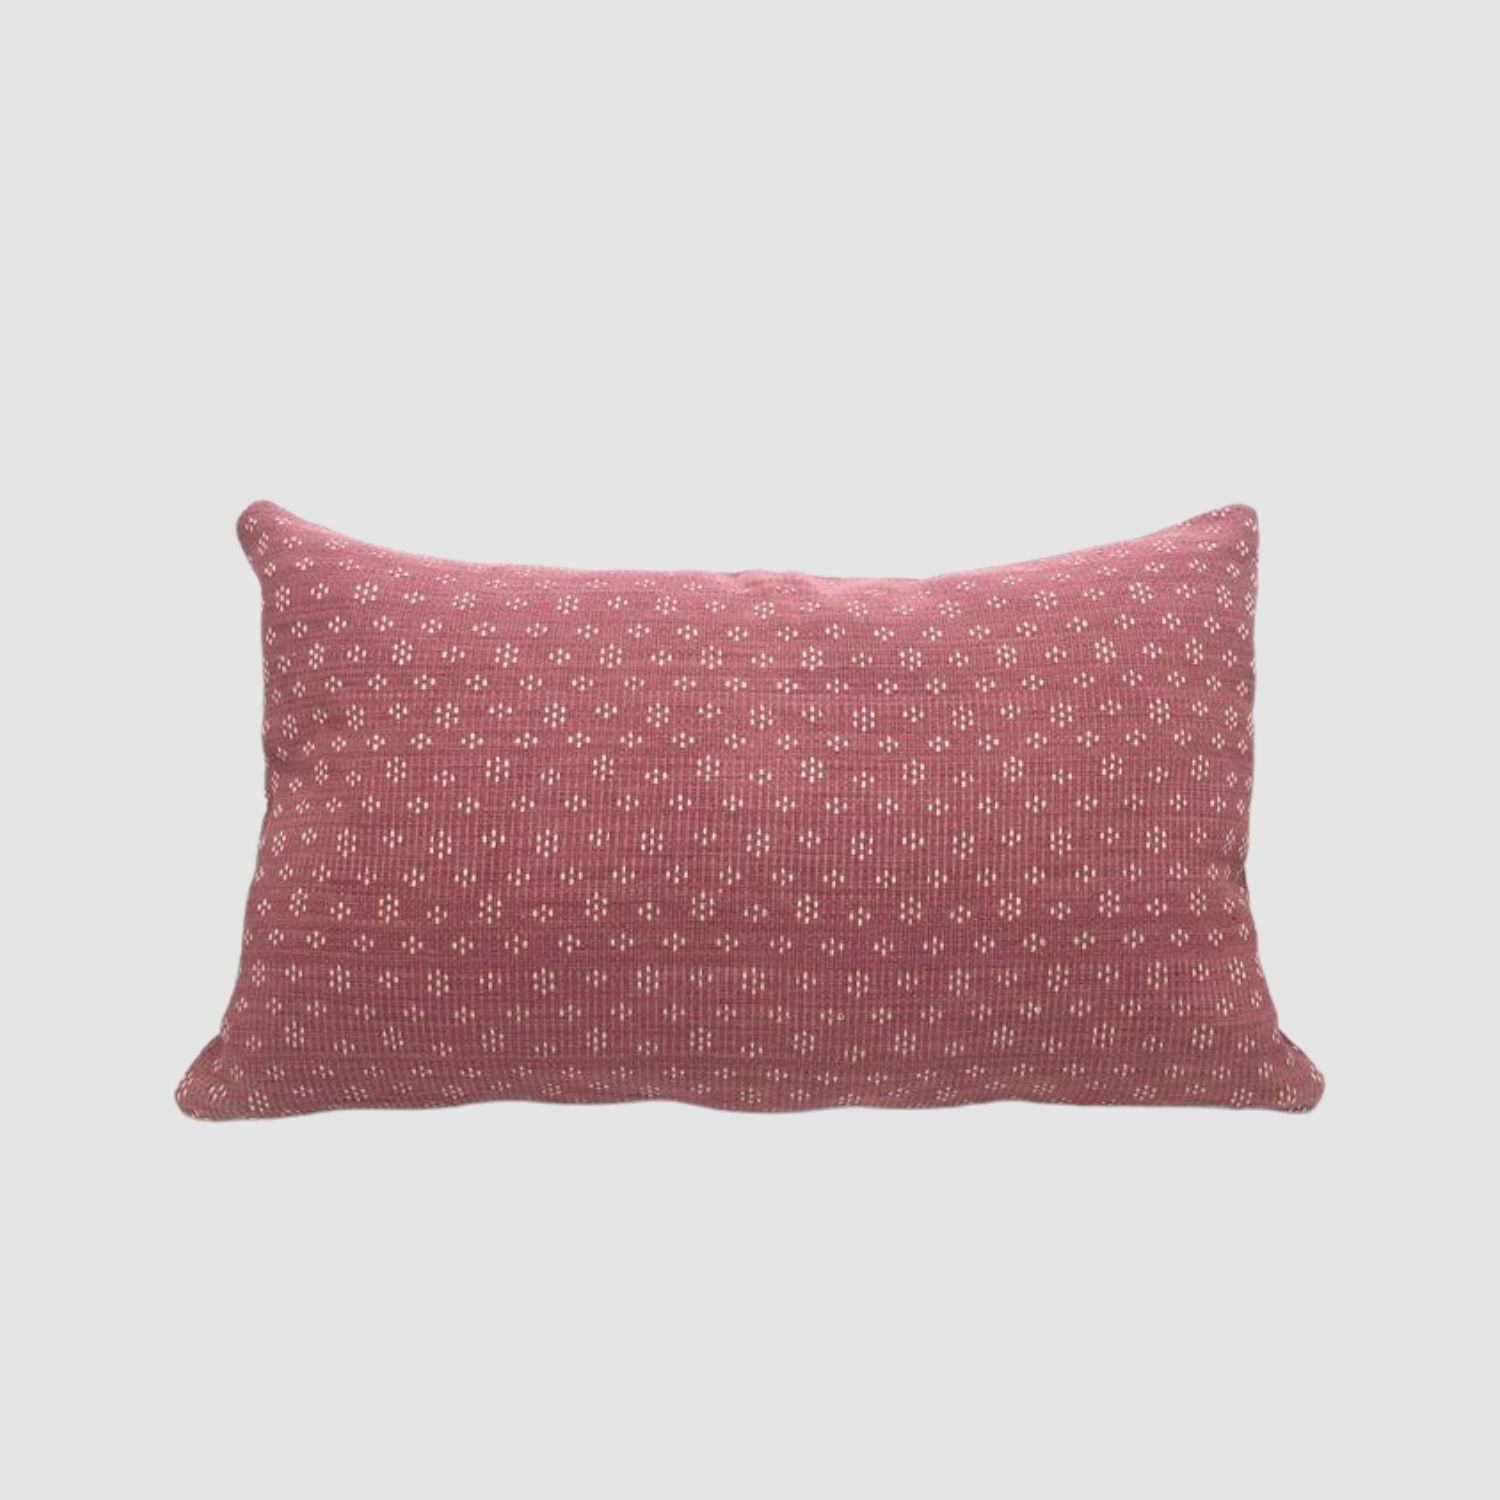 Coussin Balu chauung rose